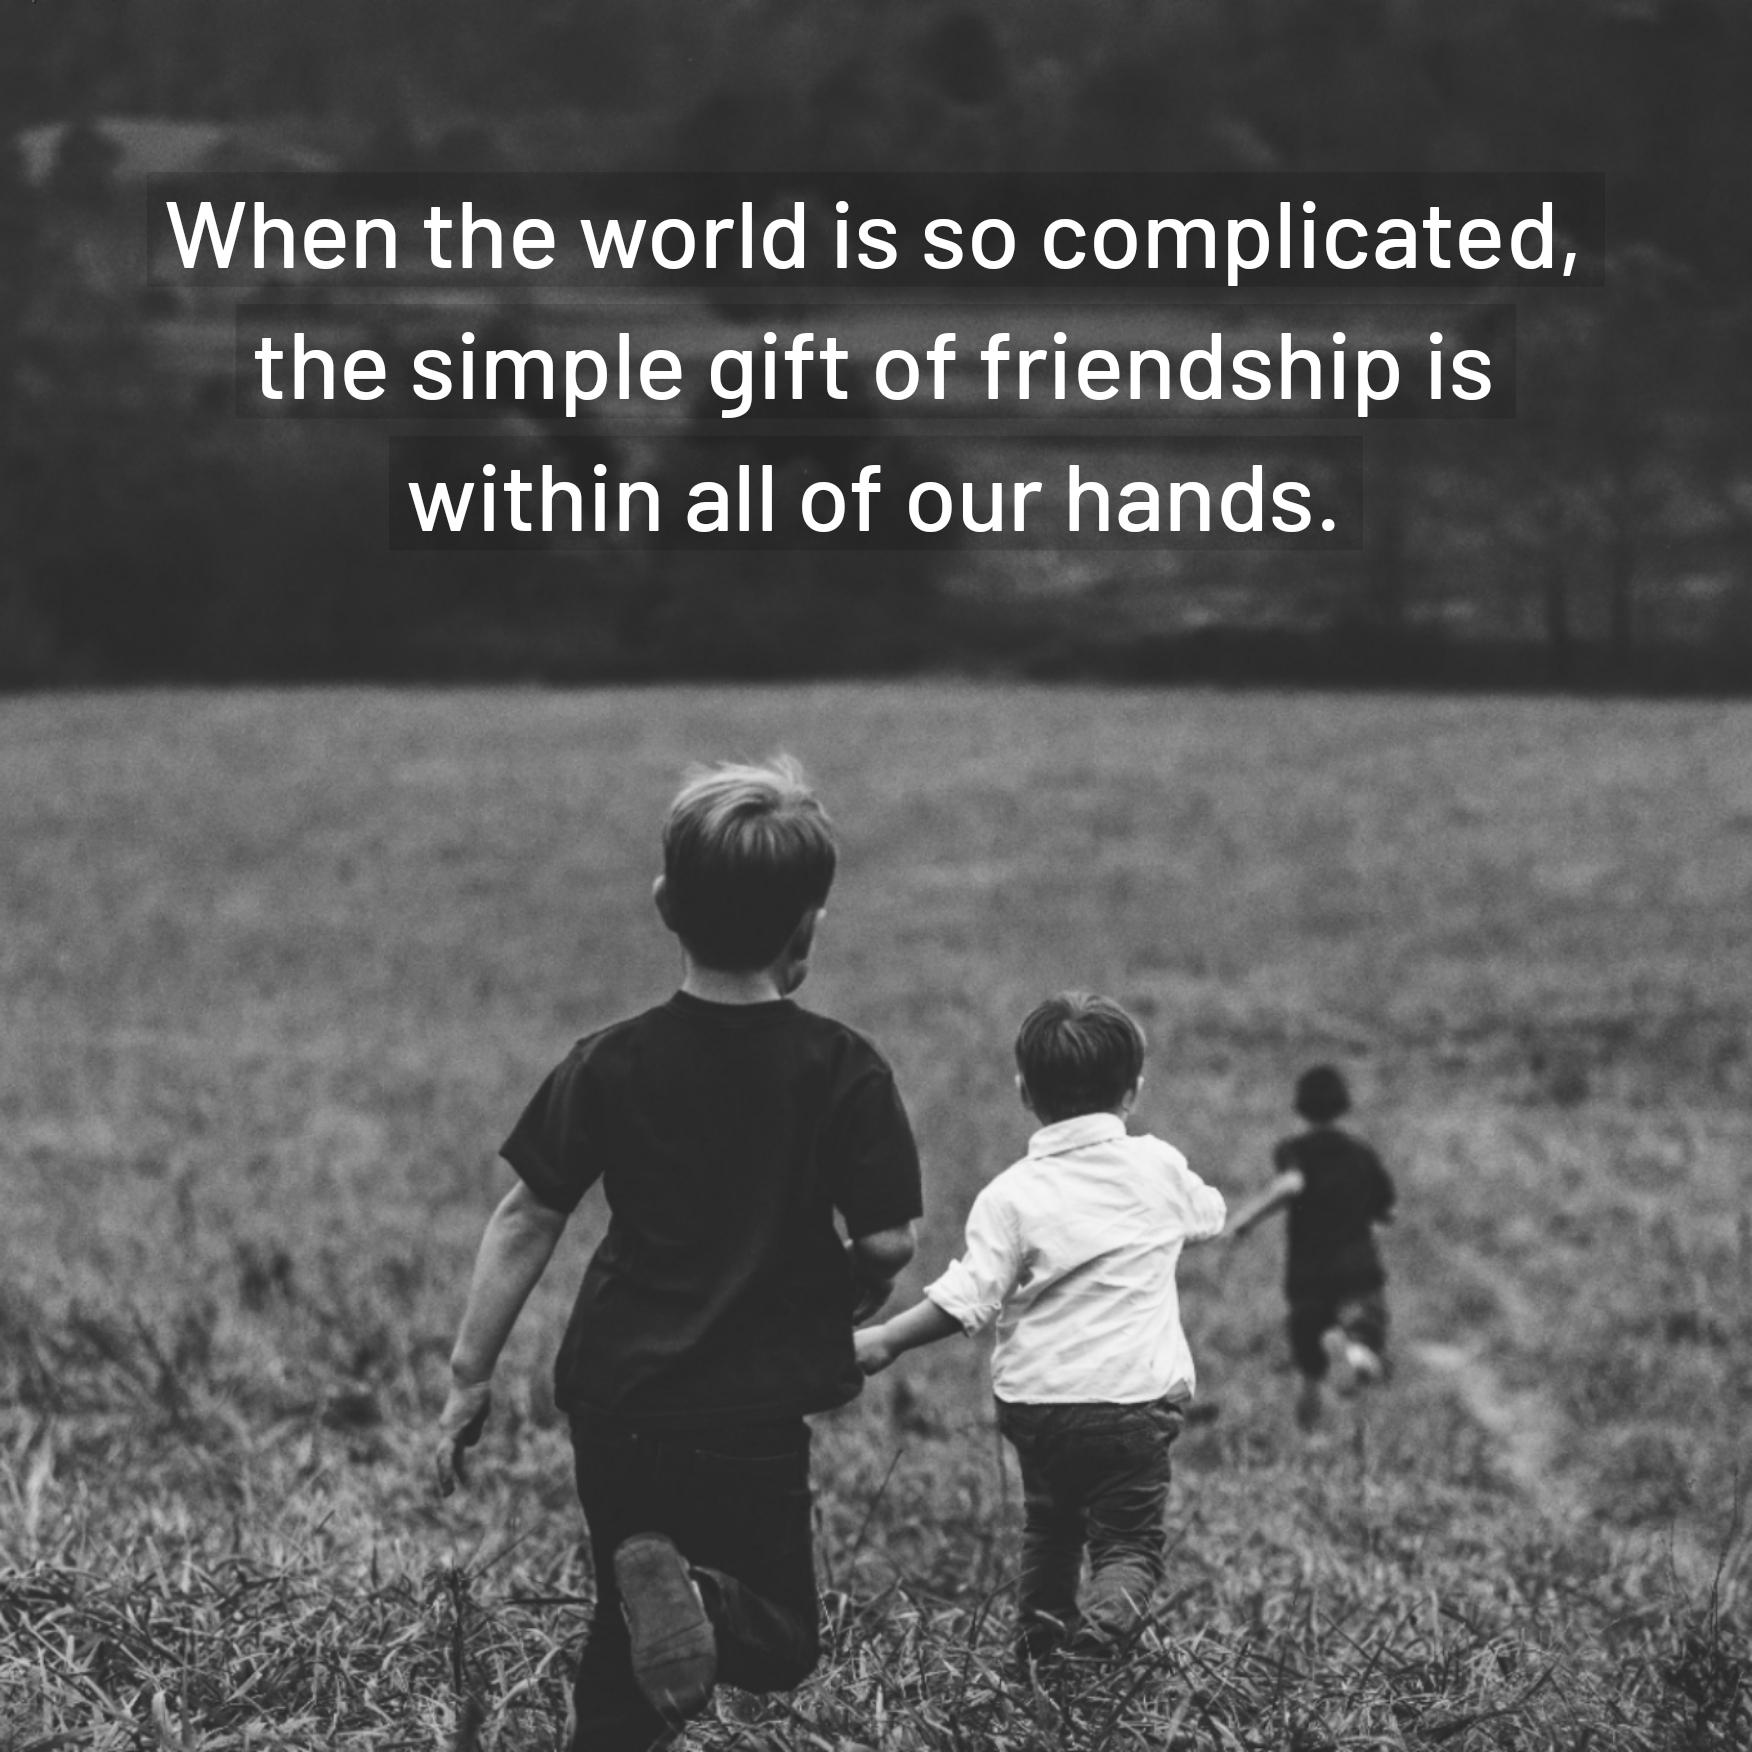 When the world is so complicated the simple gift of friendship